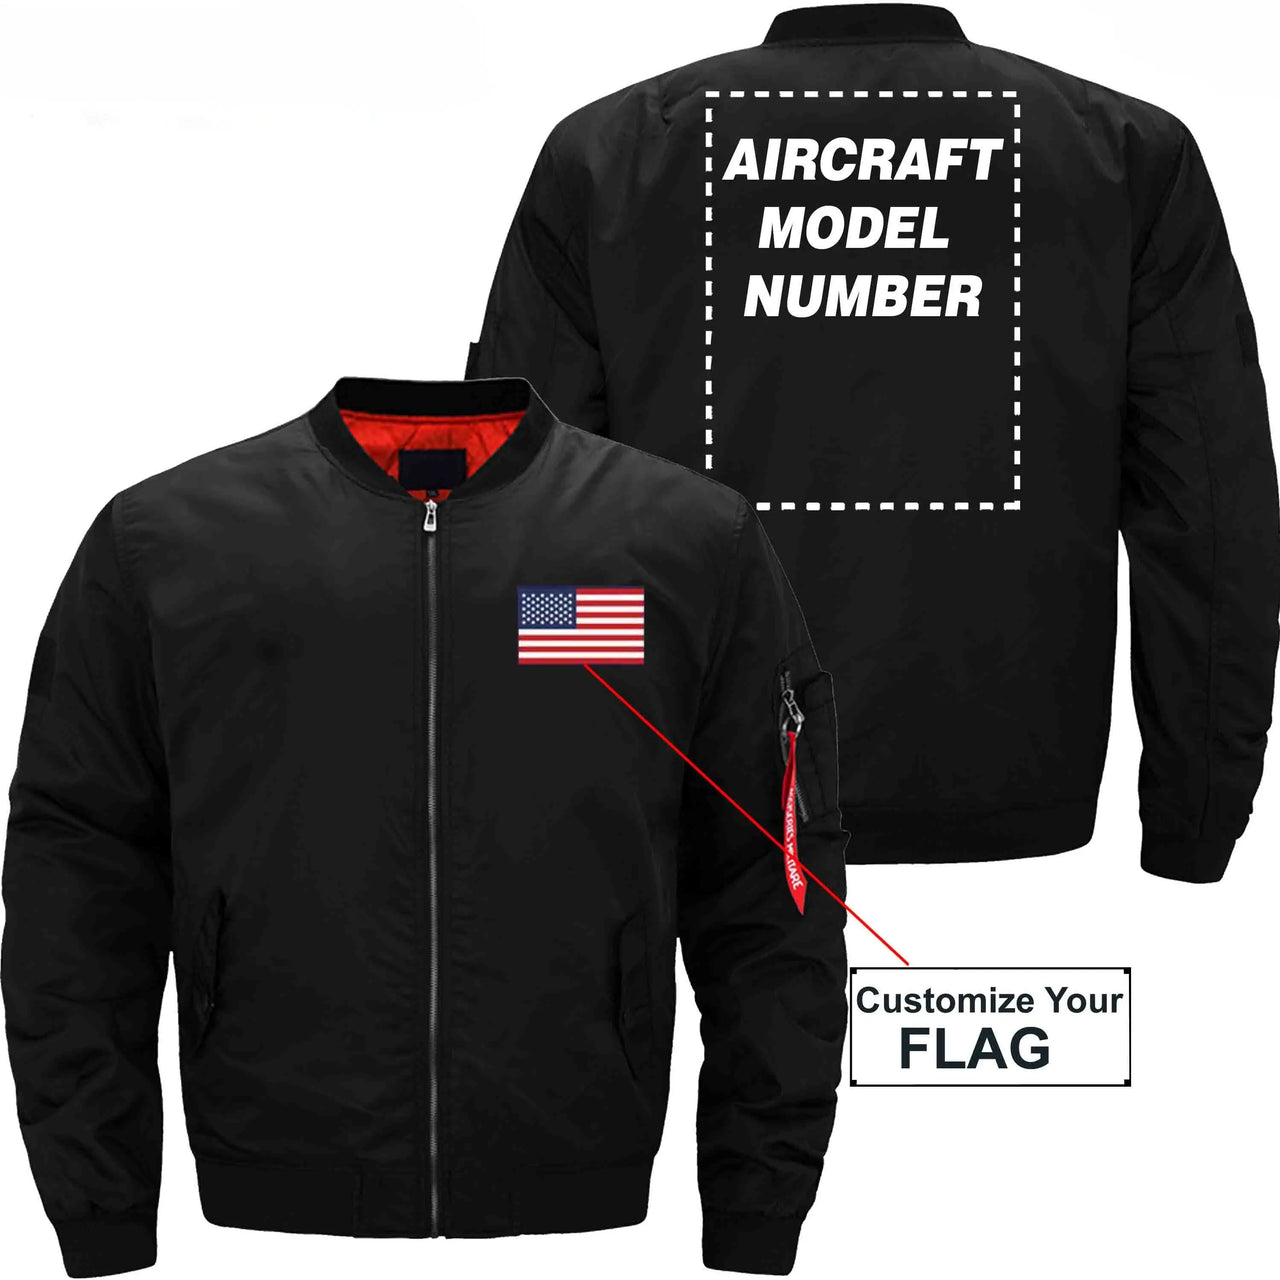 FLAG WITH AIRCRAFT MODEL NUMBER - JACKET THE AV8R